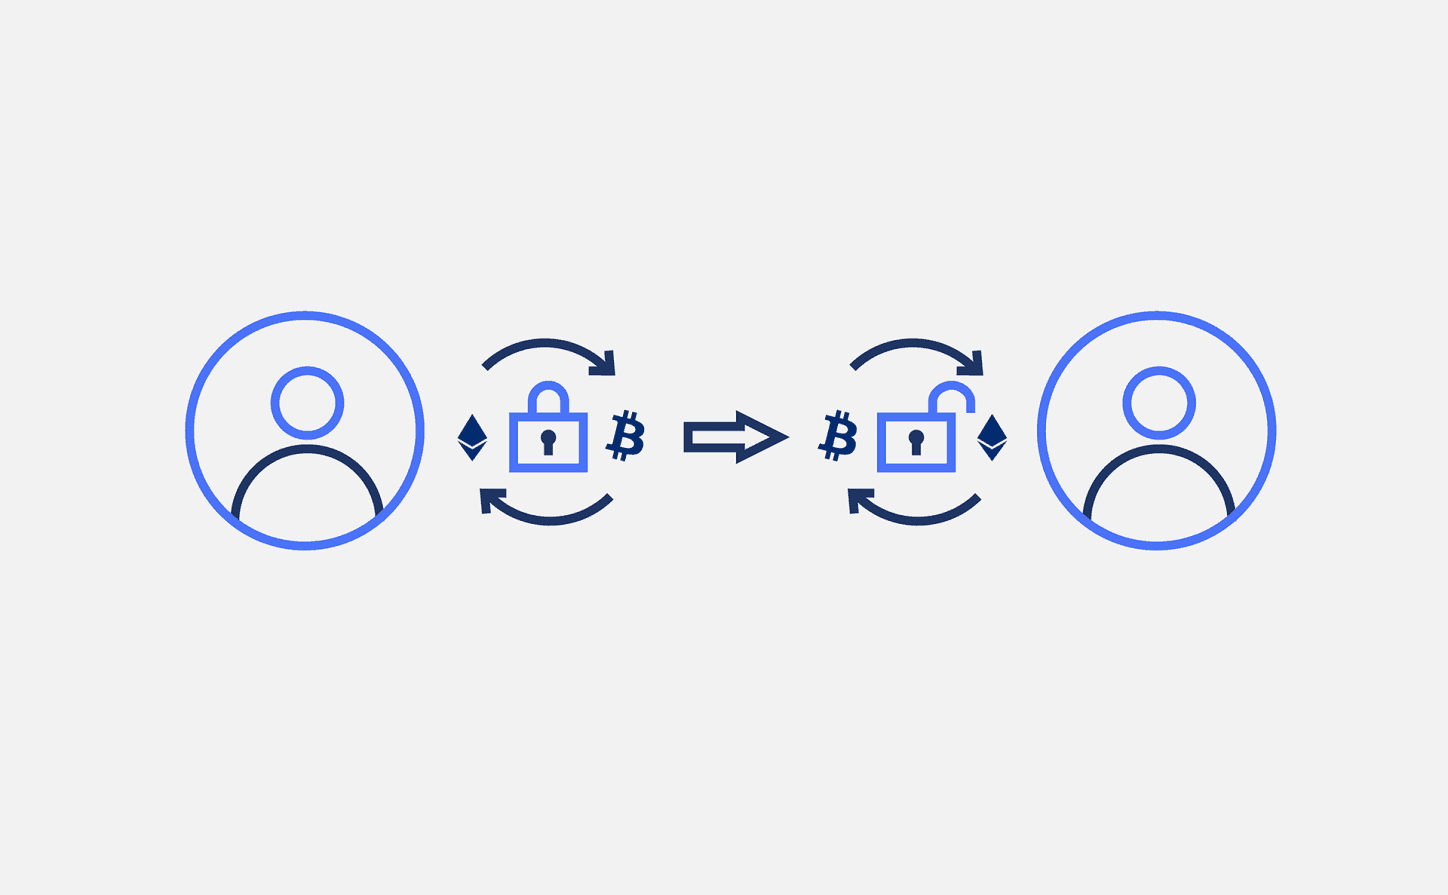 Illustration showing ETH being exchanged to BTC and send to another user with a locked exchange rate. 